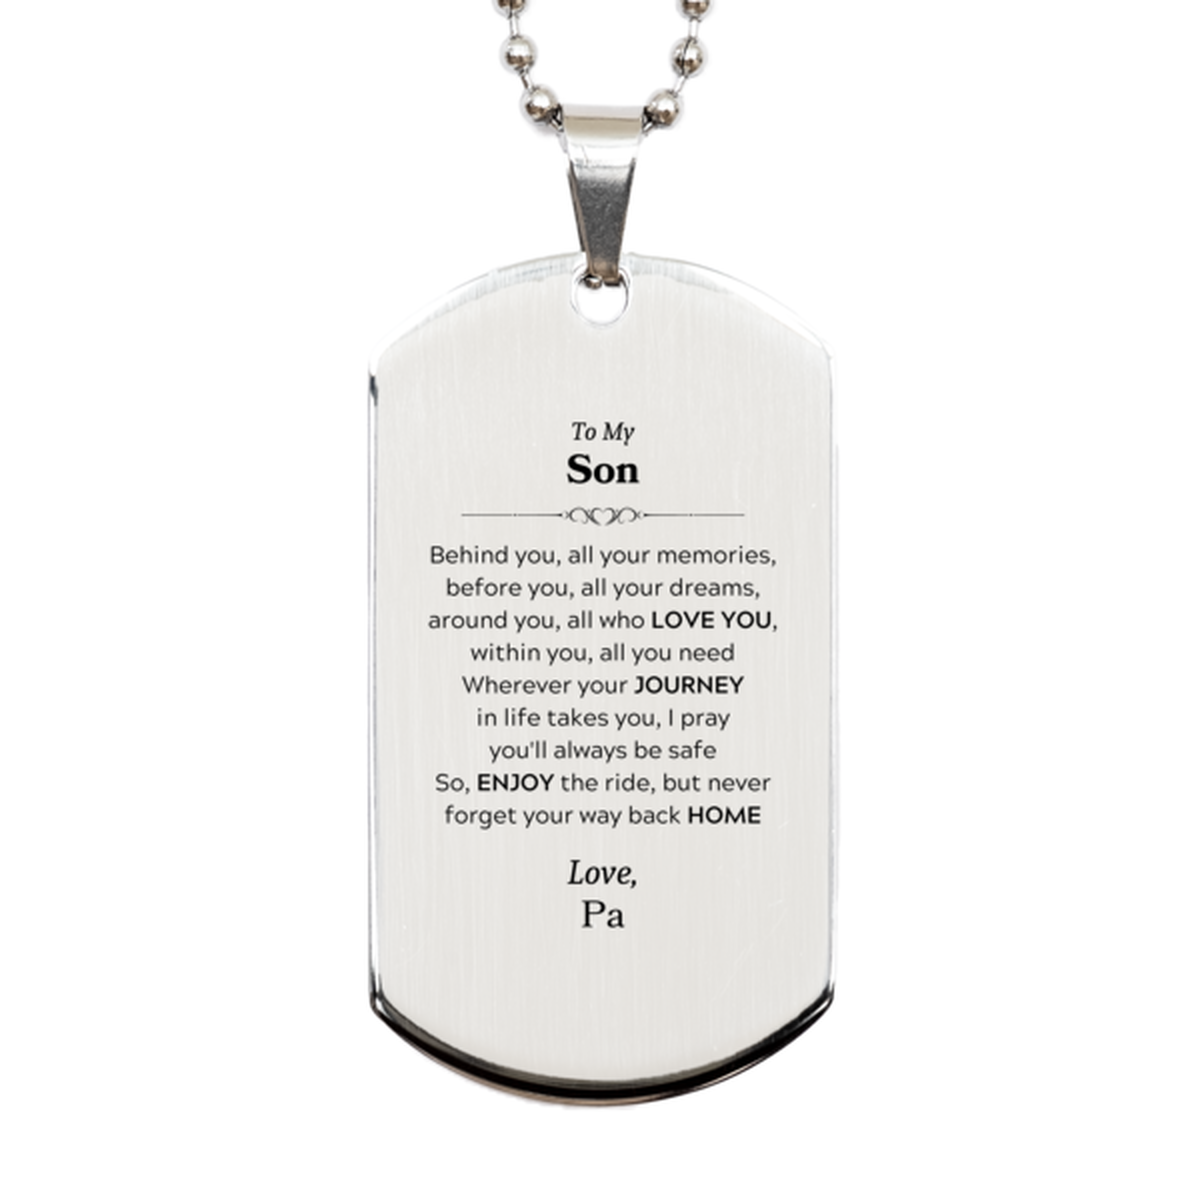 To My Son Graduation Gifts from Pa, Son Silver Dog Tag Christmas Birthday Gifts for Son Behind you, all your memories, before you, all your dreams. Love, Pa